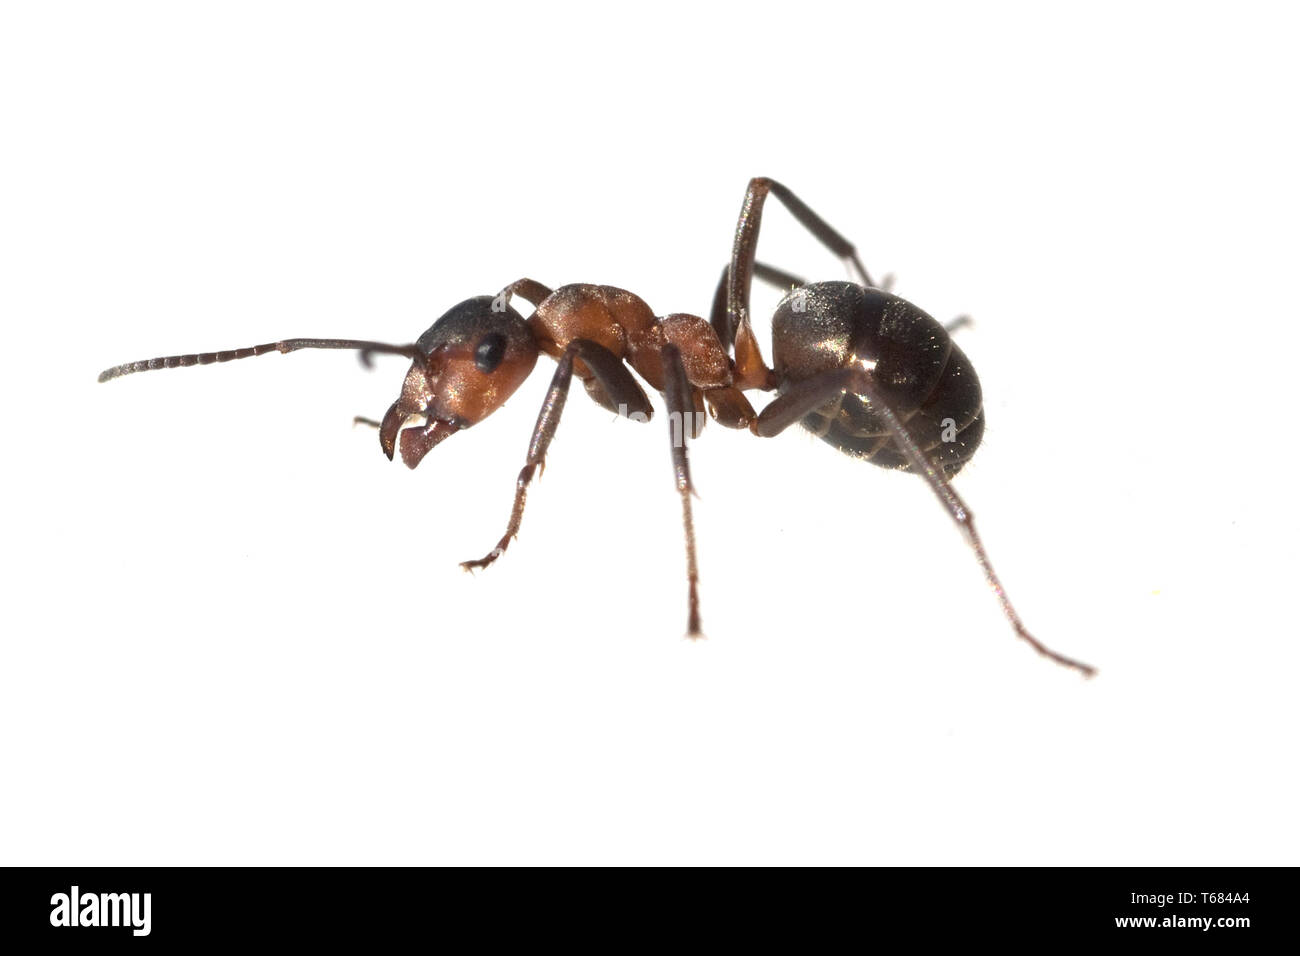 Horse ant or Red Wood Ant, Formica rufa, Germany Stock Photo